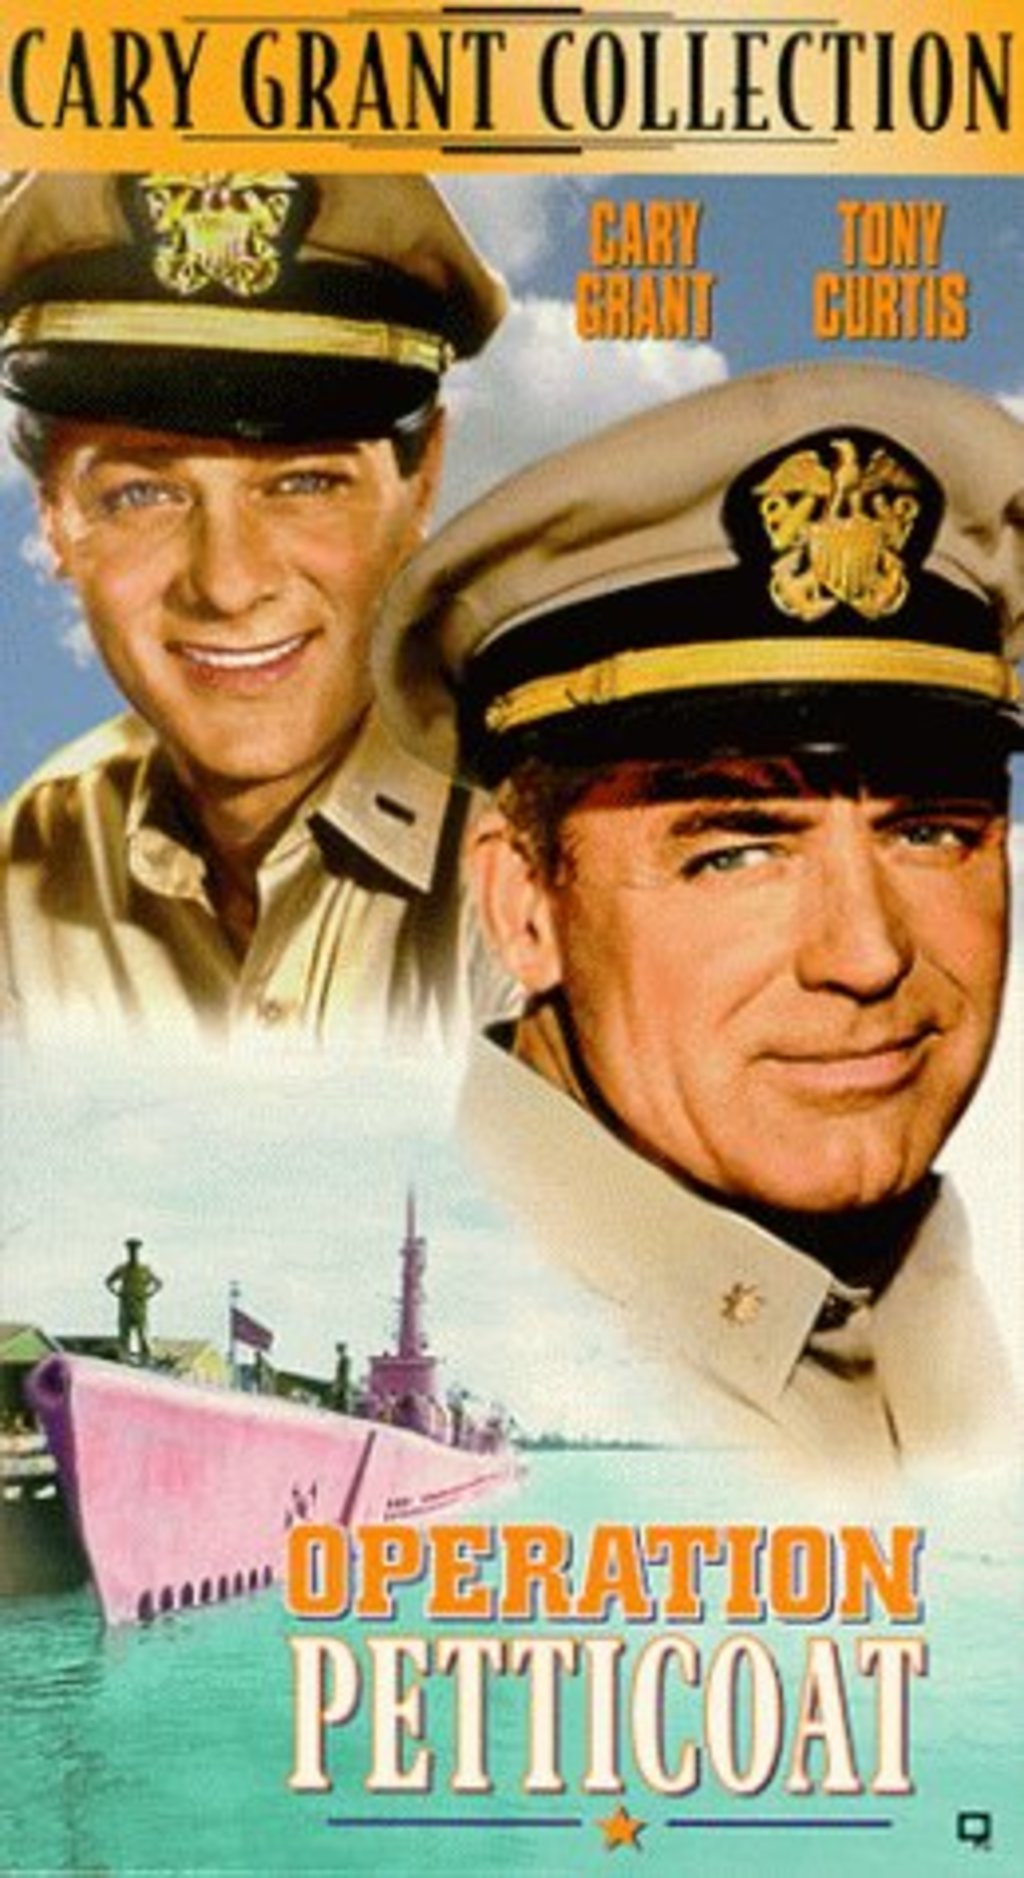 Image result for operation petticoat poster